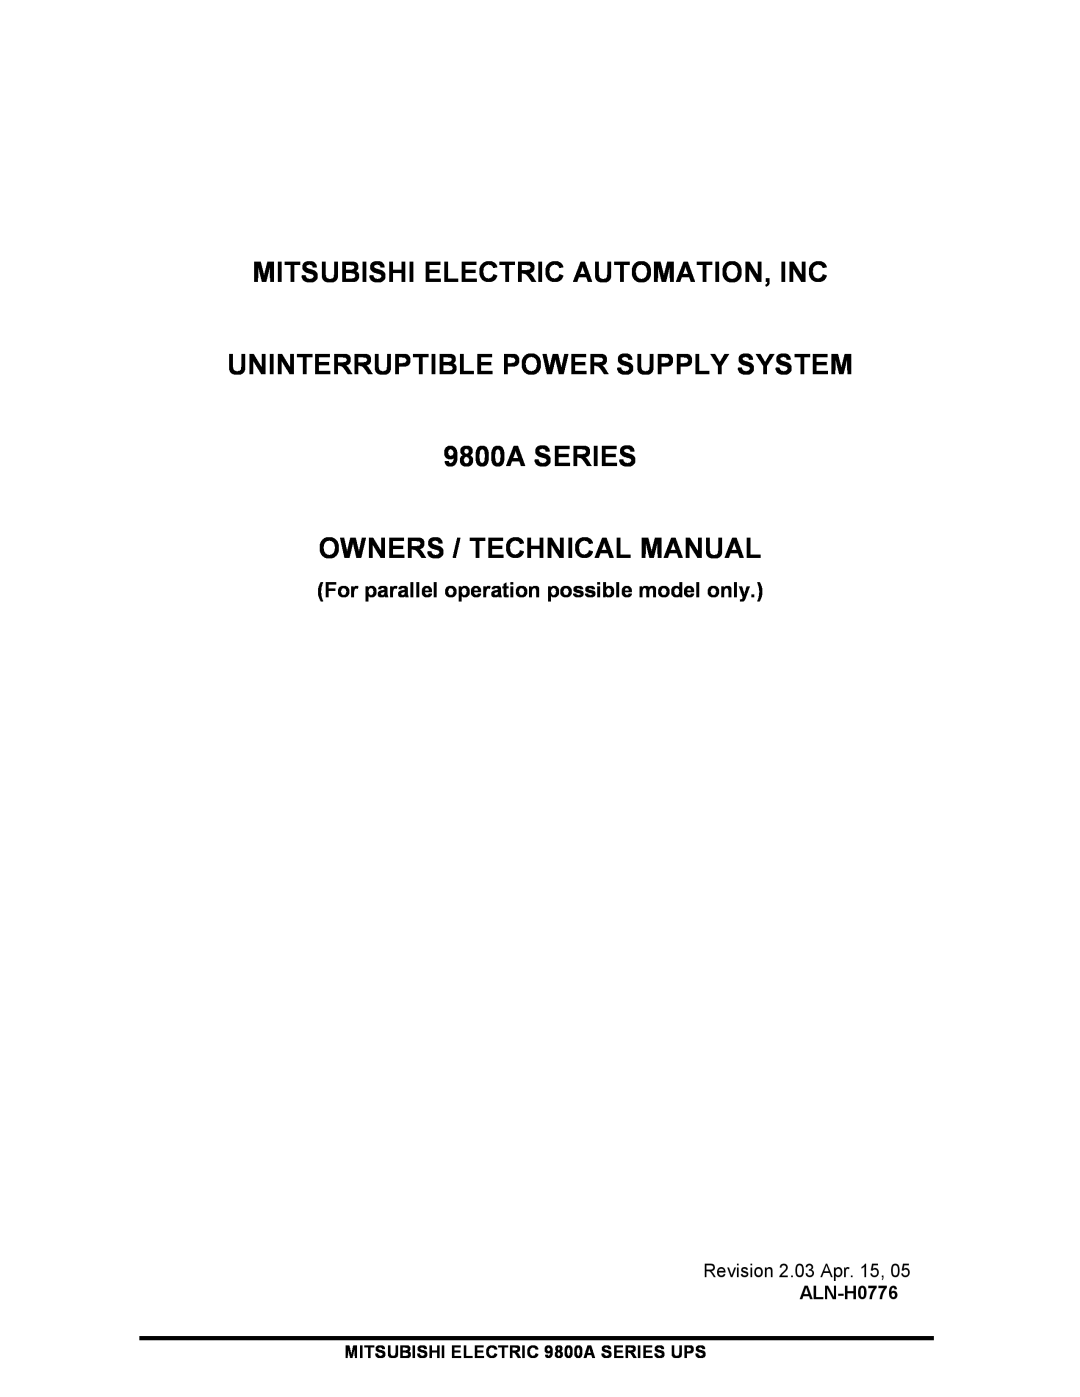 Mitsubishi 9800A Series technical manual Mitsubishi Electric Automation, Inc, Owners / Technical Manual, ALN-H0776 